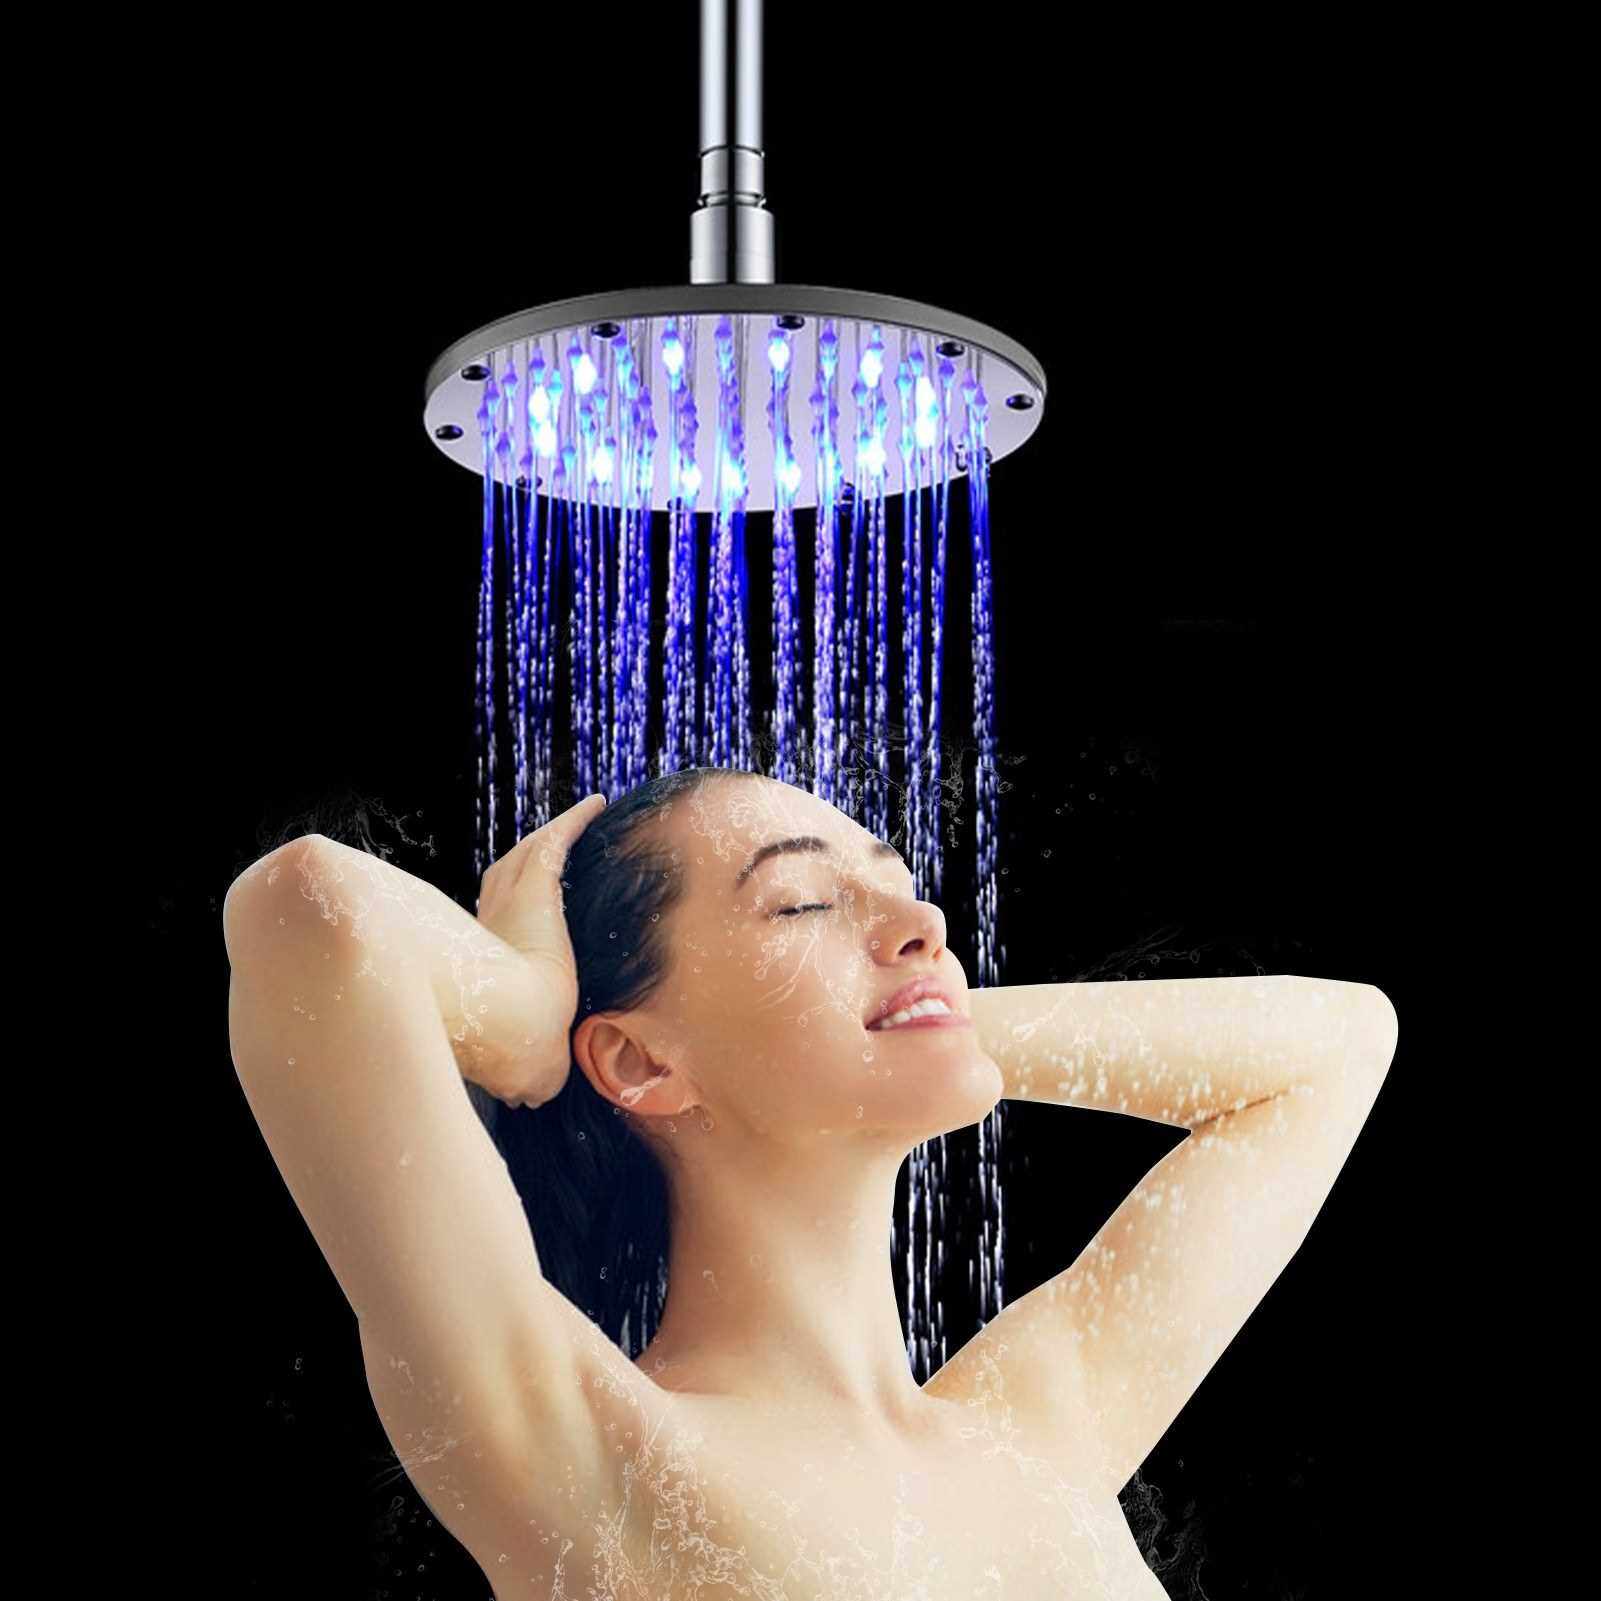 8 inch LED Rainfall Shower Head Round Shower Head Automatically RGB Color-Changing Temperature Sensor Showerhead for Bathroom (White)